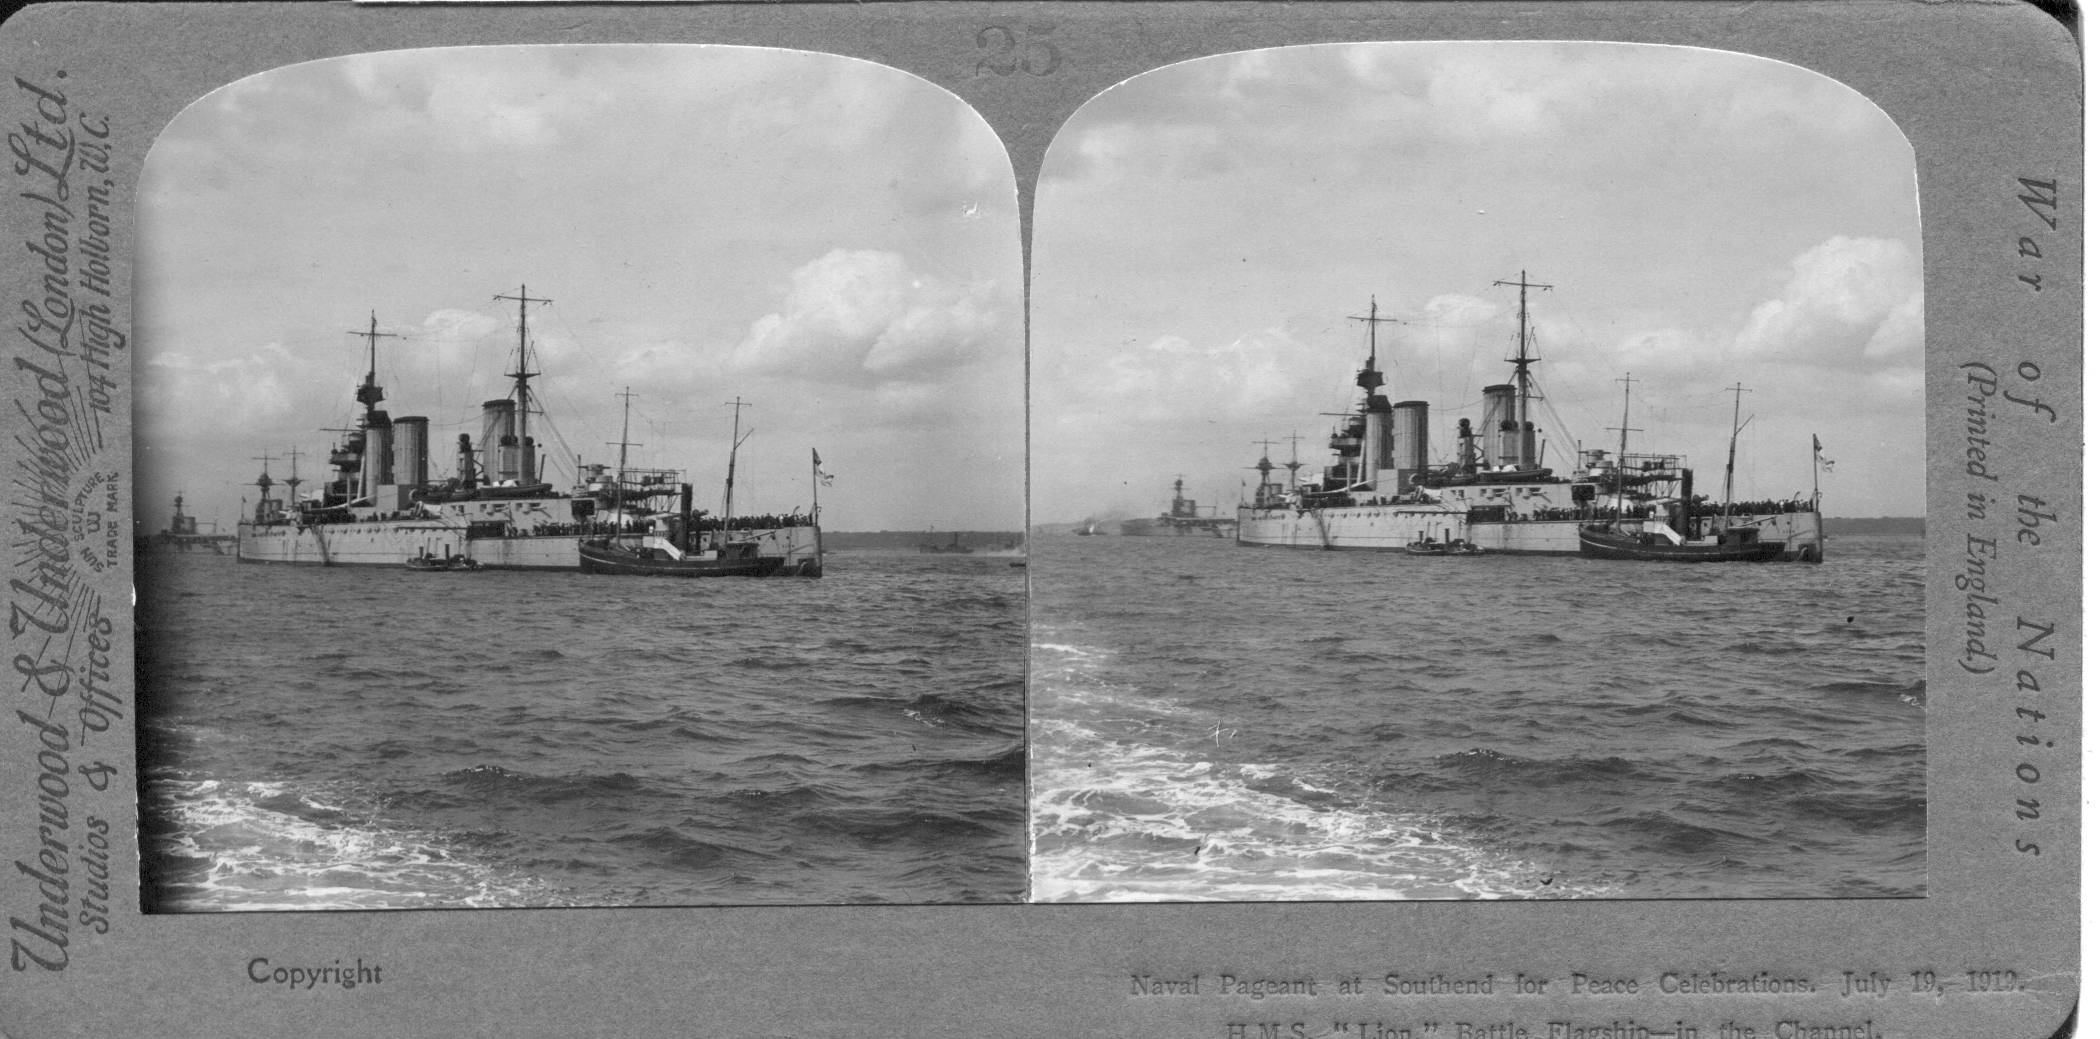 Naval Pageant at Southend for Peace Celebrations. July 19, 1919, H.M.S. "Lion," Battle Flagship